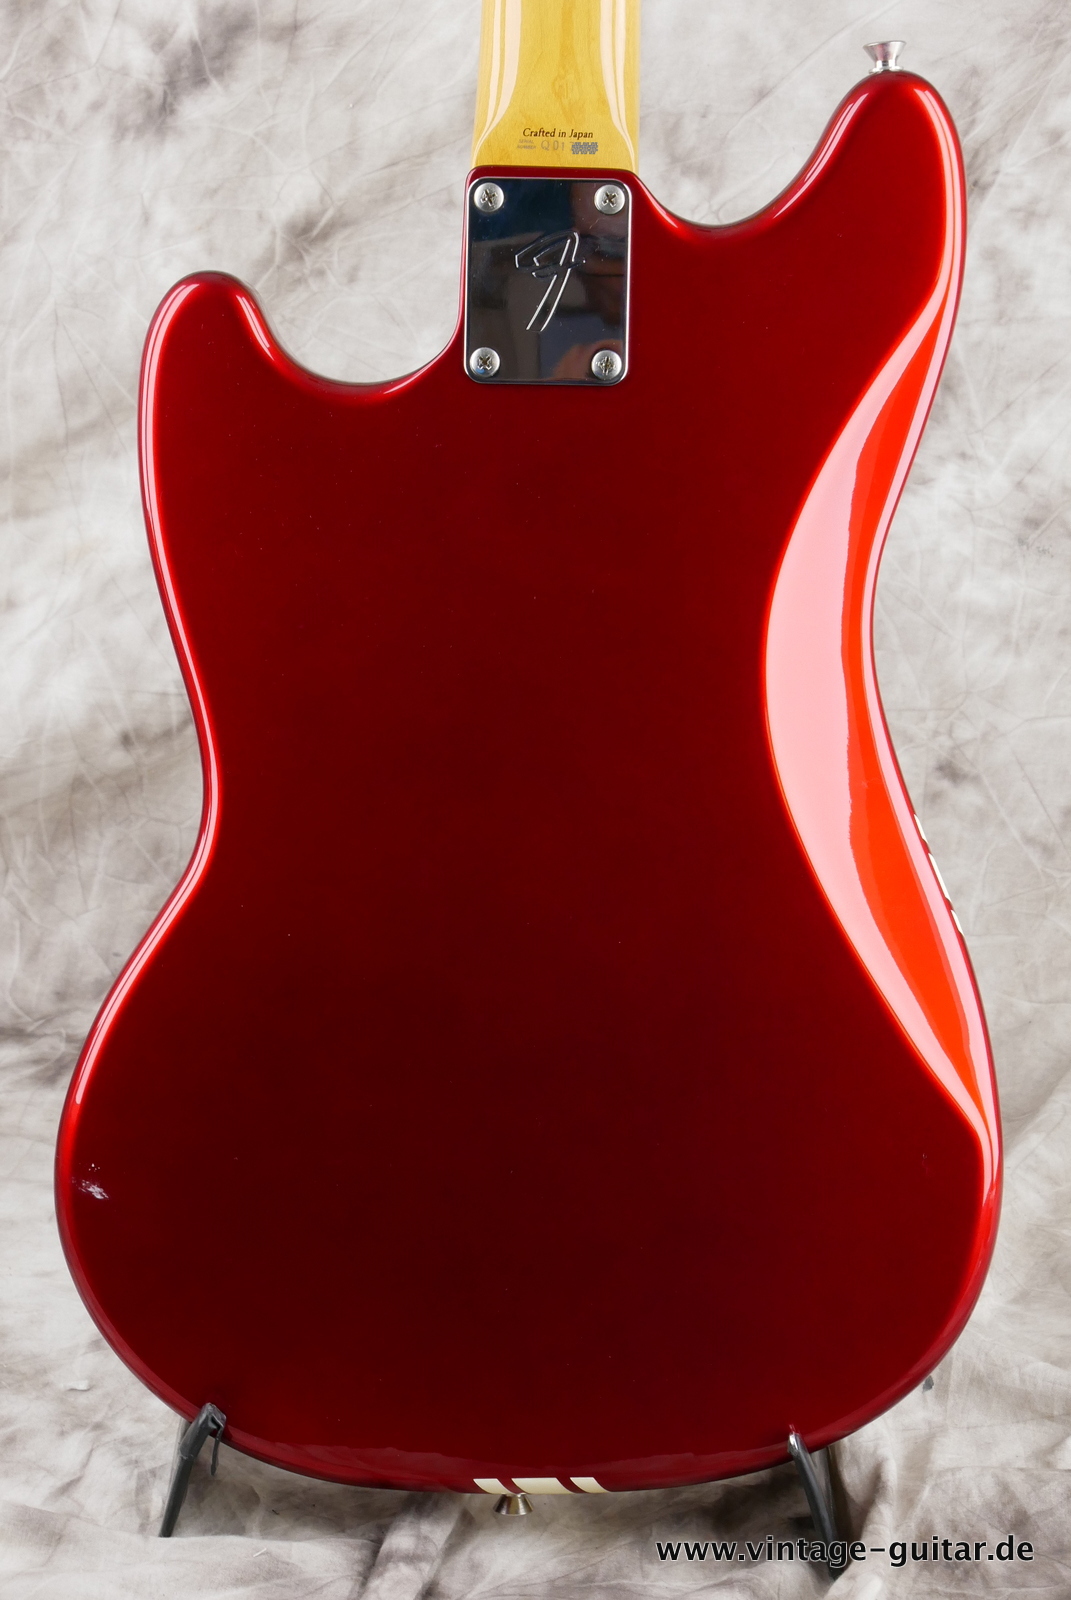 Fender_Mustang_competition_70s_RI_candy_apple_red_Japan_2002-004.JPG